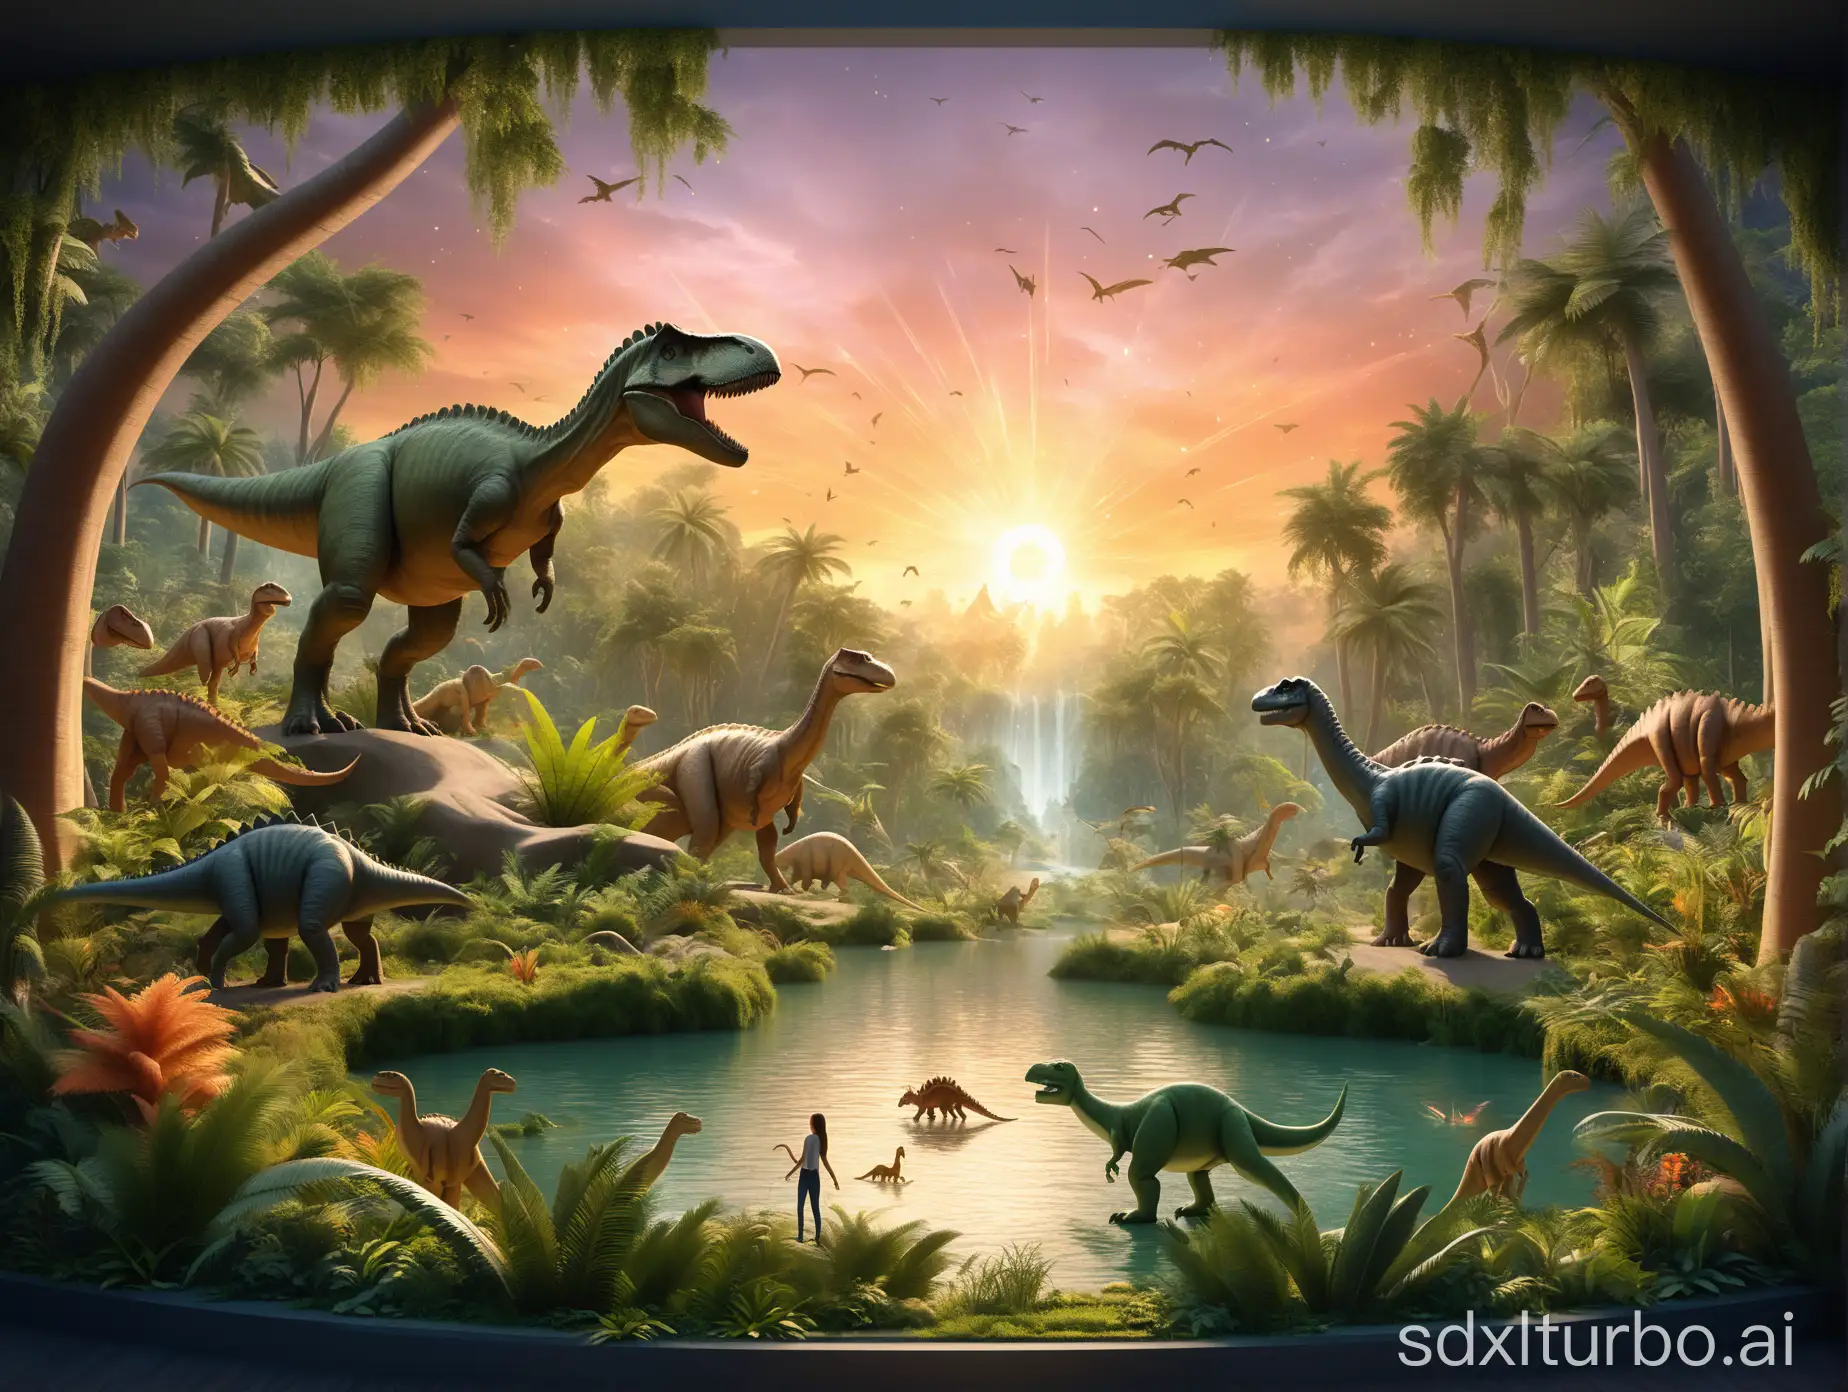 A captivating, cinematic scene of a lush, vibrant forest where dinosaurs, humans, and animals coexist peacefully, with no humans in sight. The dinosaurs display intricate details that showcase their natural splendor, and the background features a breathtaking sunset with a golden sky radiating warmth and serenity. The foreground is filled with lush greenery, a winding river, and a diverse range of flora and fauna. The composition exudes harmony, magic, and awe, providing a visually stunning and immersive experience. This masterpiece skillfully blends illustration, photography, and 3D rendering, featuring a poster-like design and a 16:9 aspect ratio, resulting in a visually engaging and dynamic display., cinematic, 3d render, typography, photo, illustration, poster